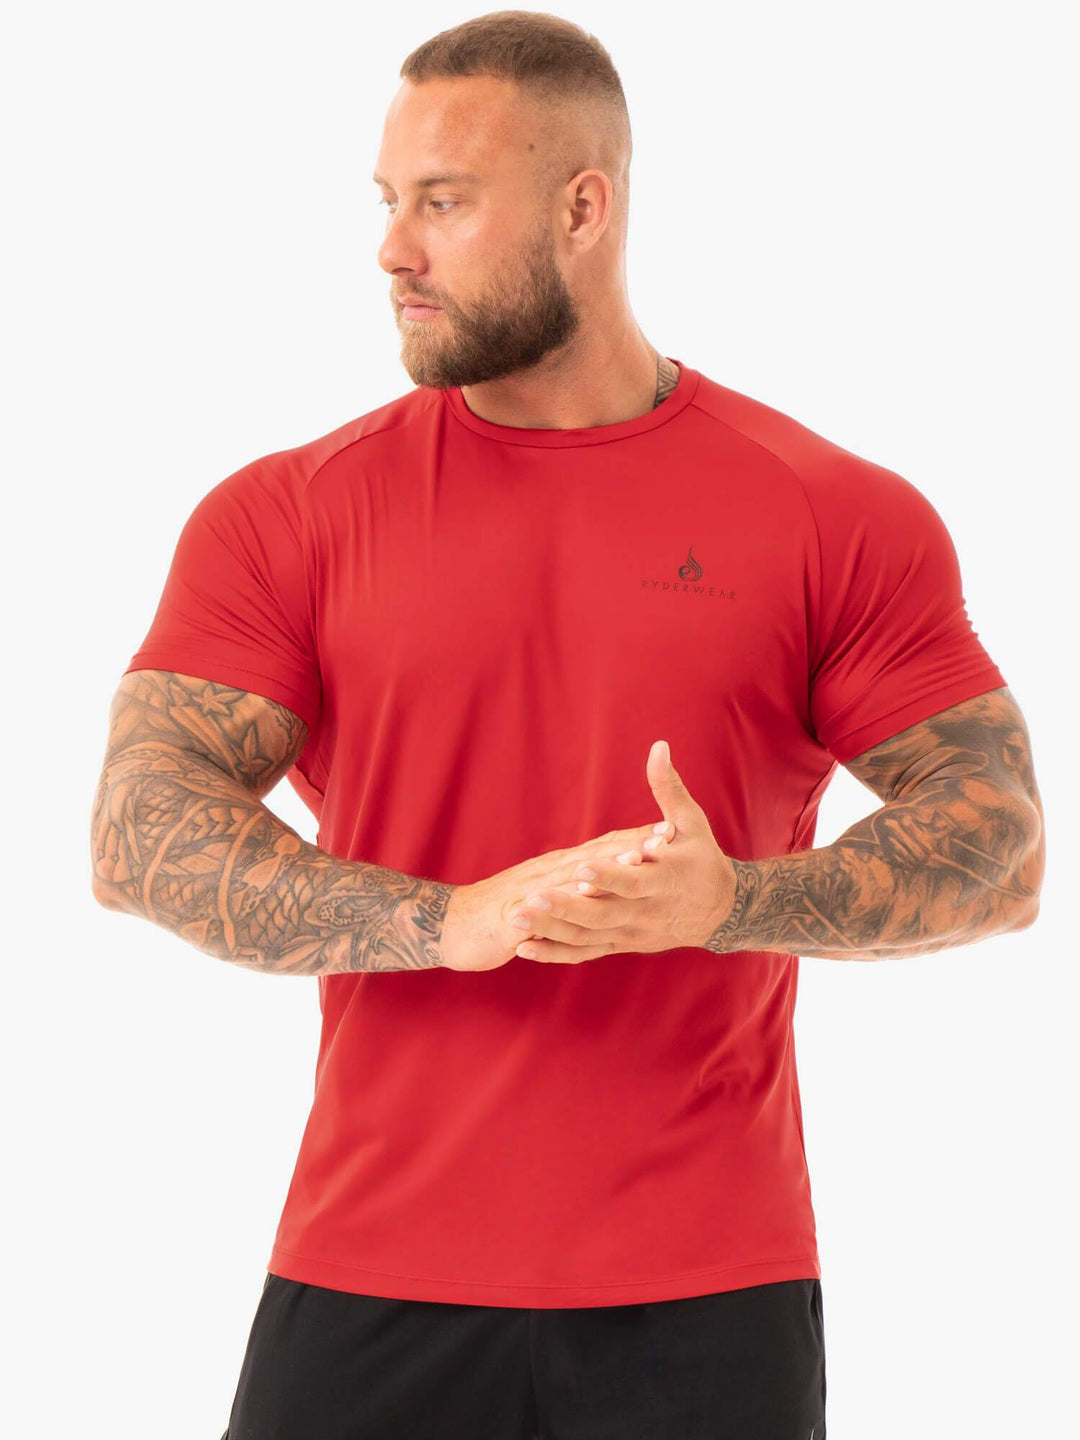 Breeze T-Shirt - Red Clothing Ryderwear 